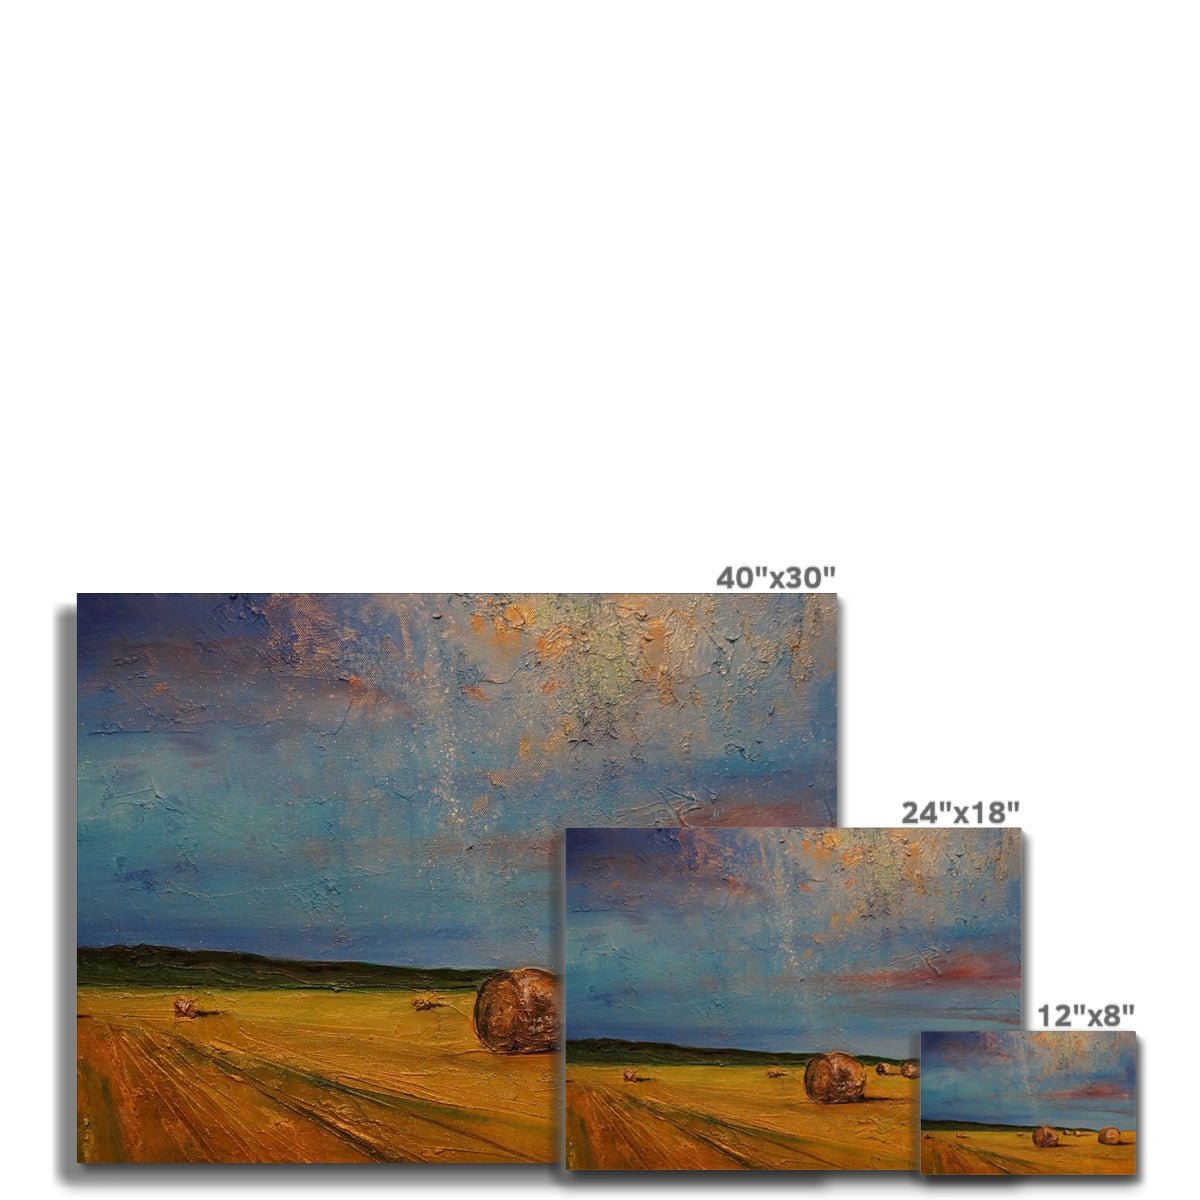 Hay Bales Painting | Canvas From Scotland-Contemporary Stretched Canvas Prints-Scottish Highlands & Lowlands Art Gallery-Paintings, Prints, Homeware, Art Gifts From Scotland By Scottish Artist Kevin Hunter